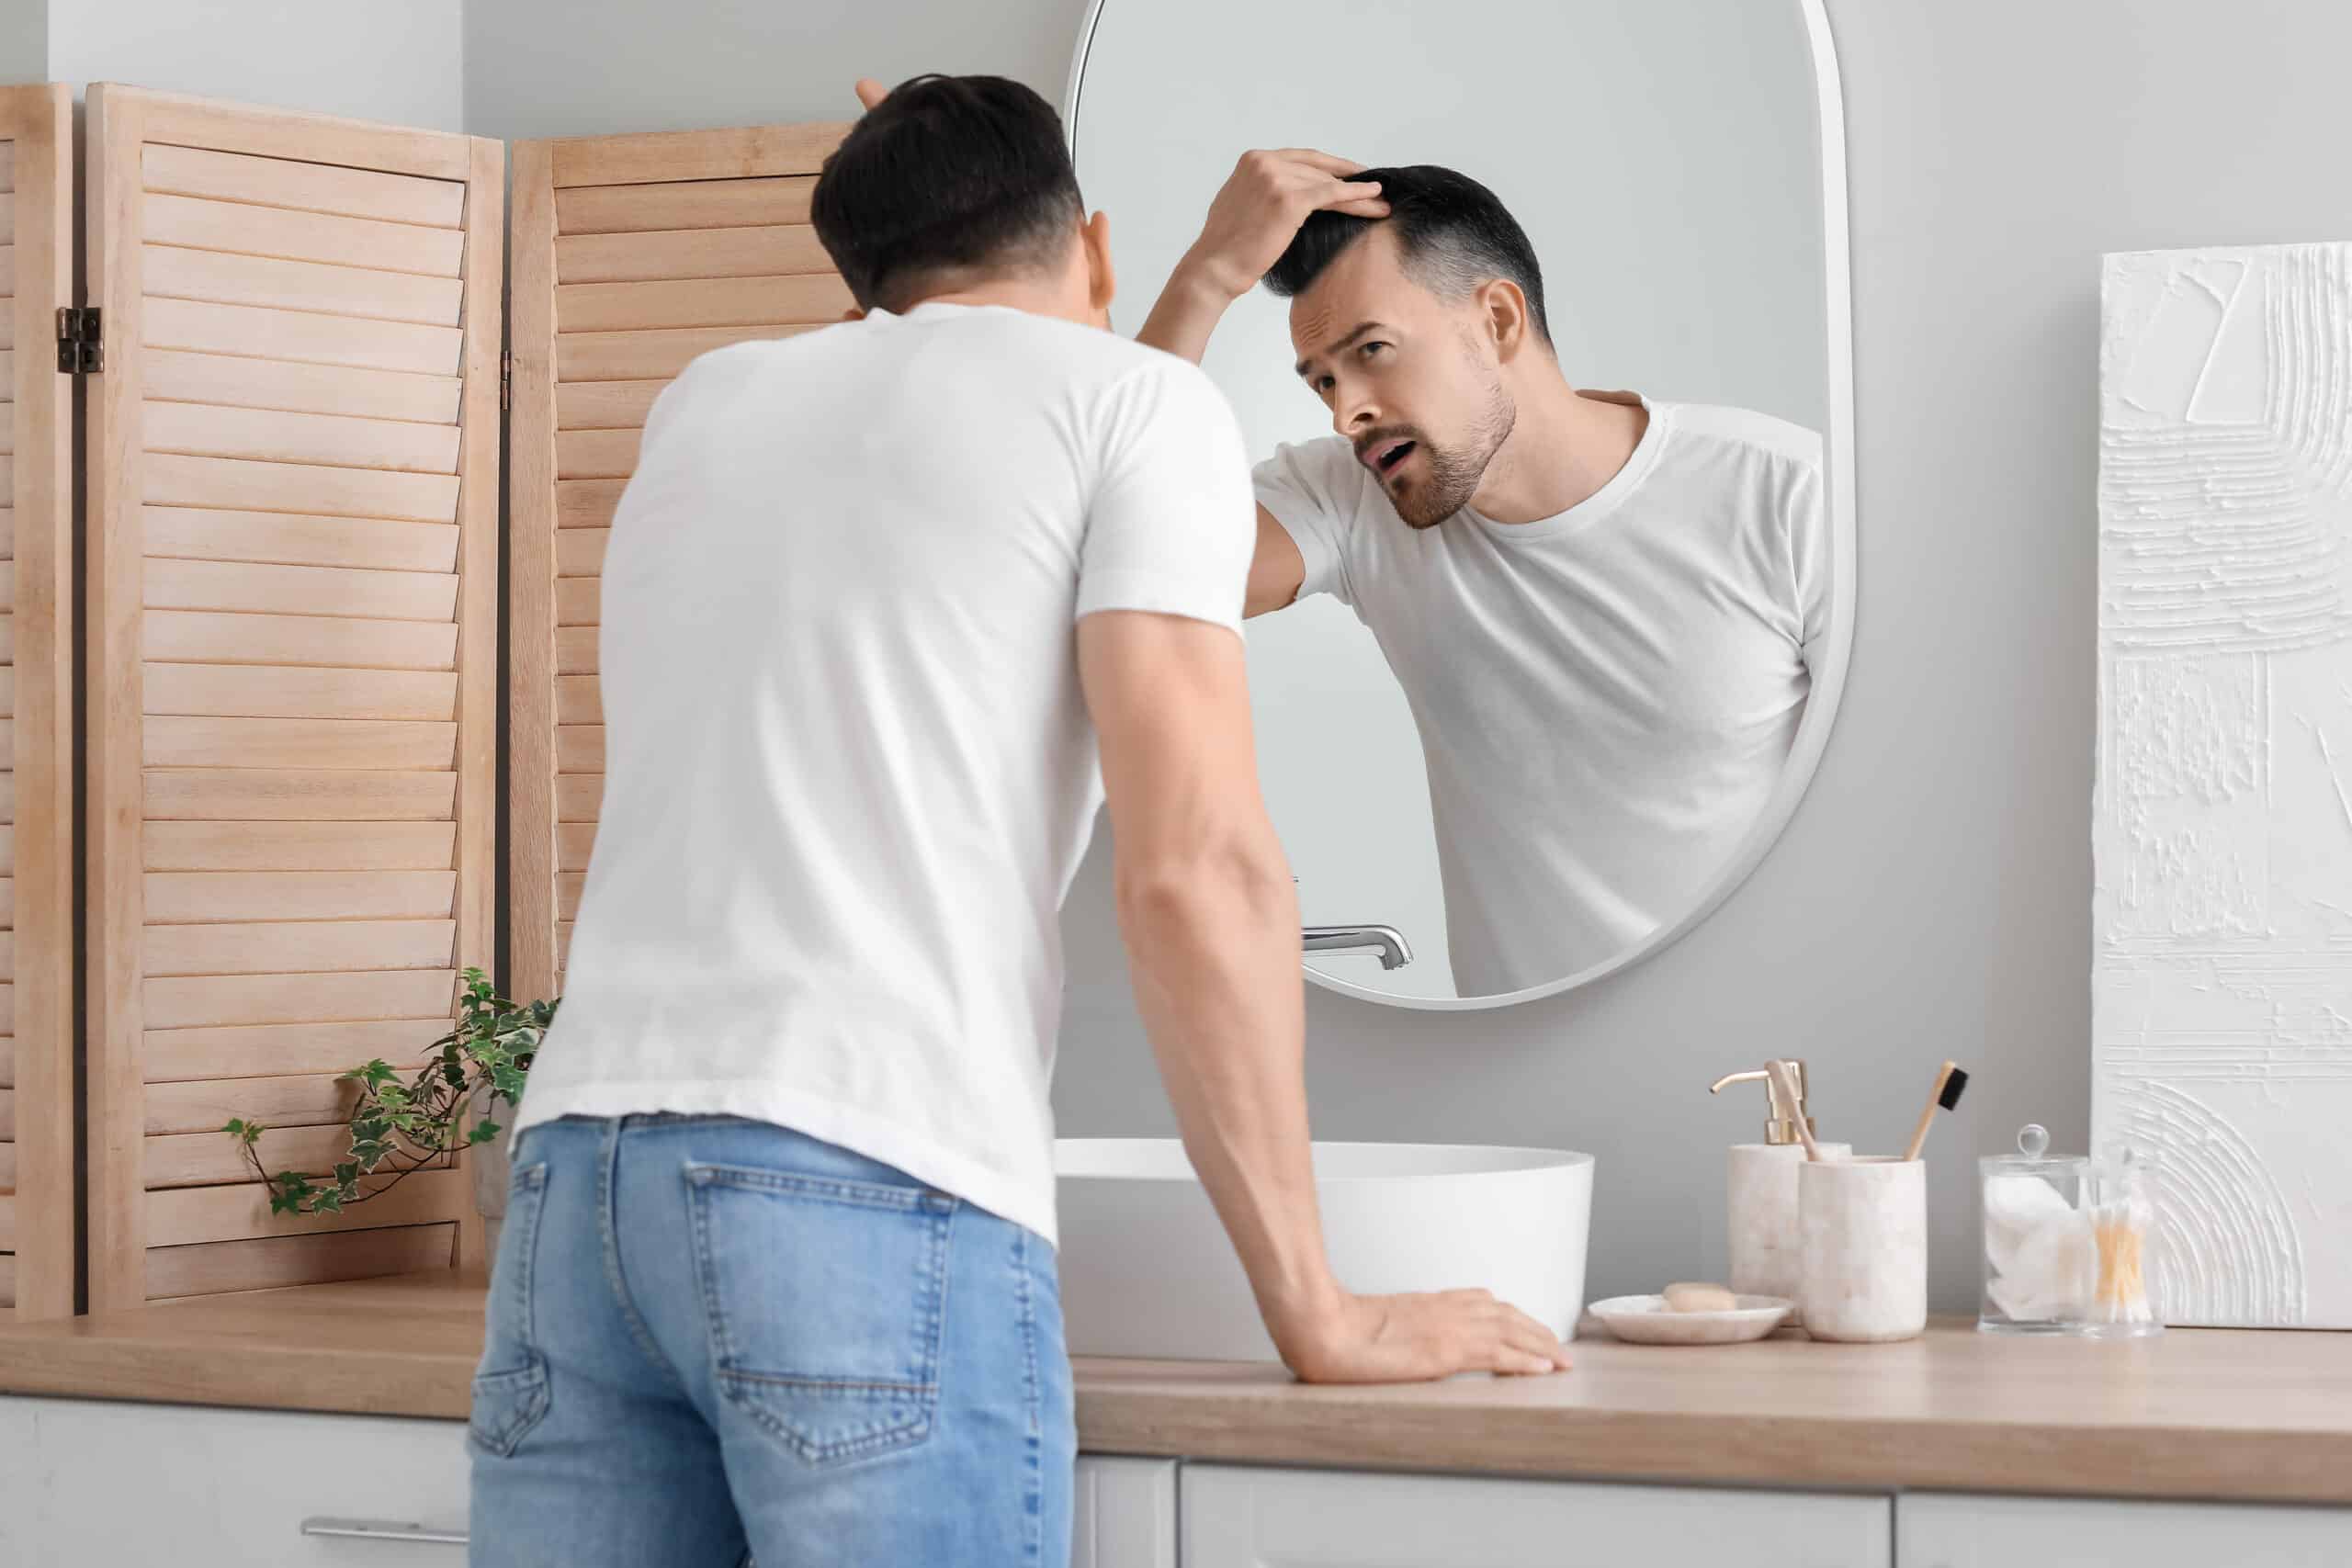 Man suffering from hair loss looking in the mirror